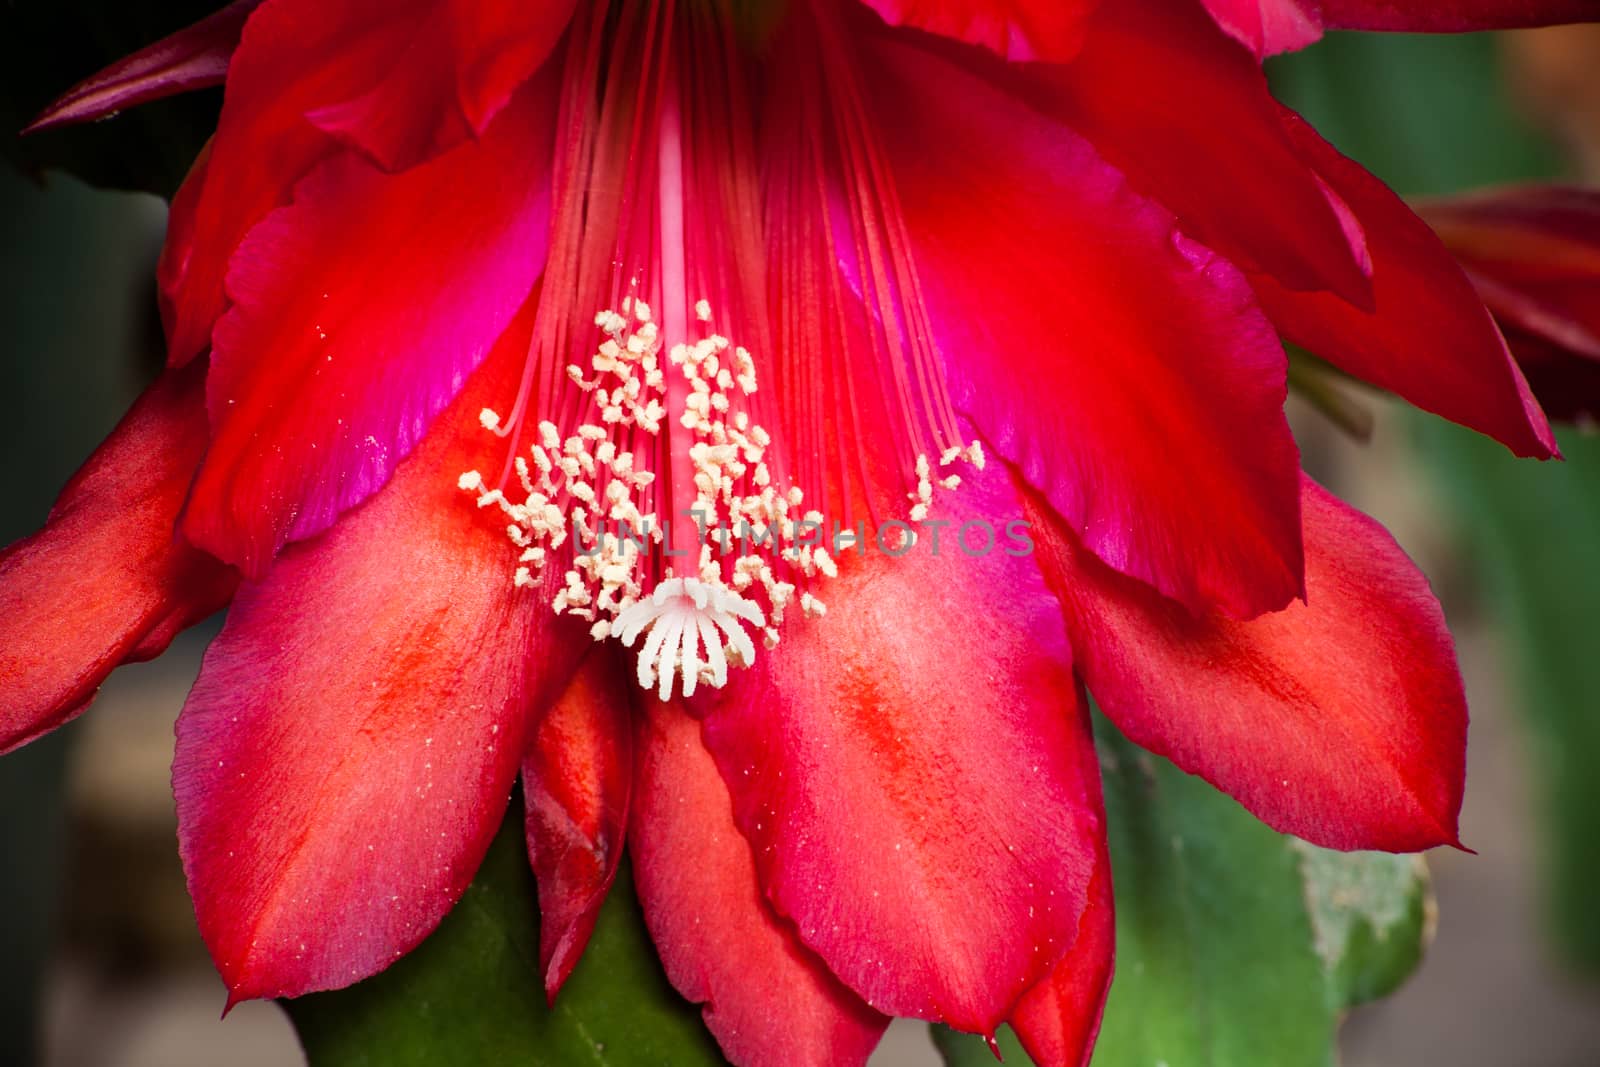 Red Cactus Flower 2 by kobus_peche